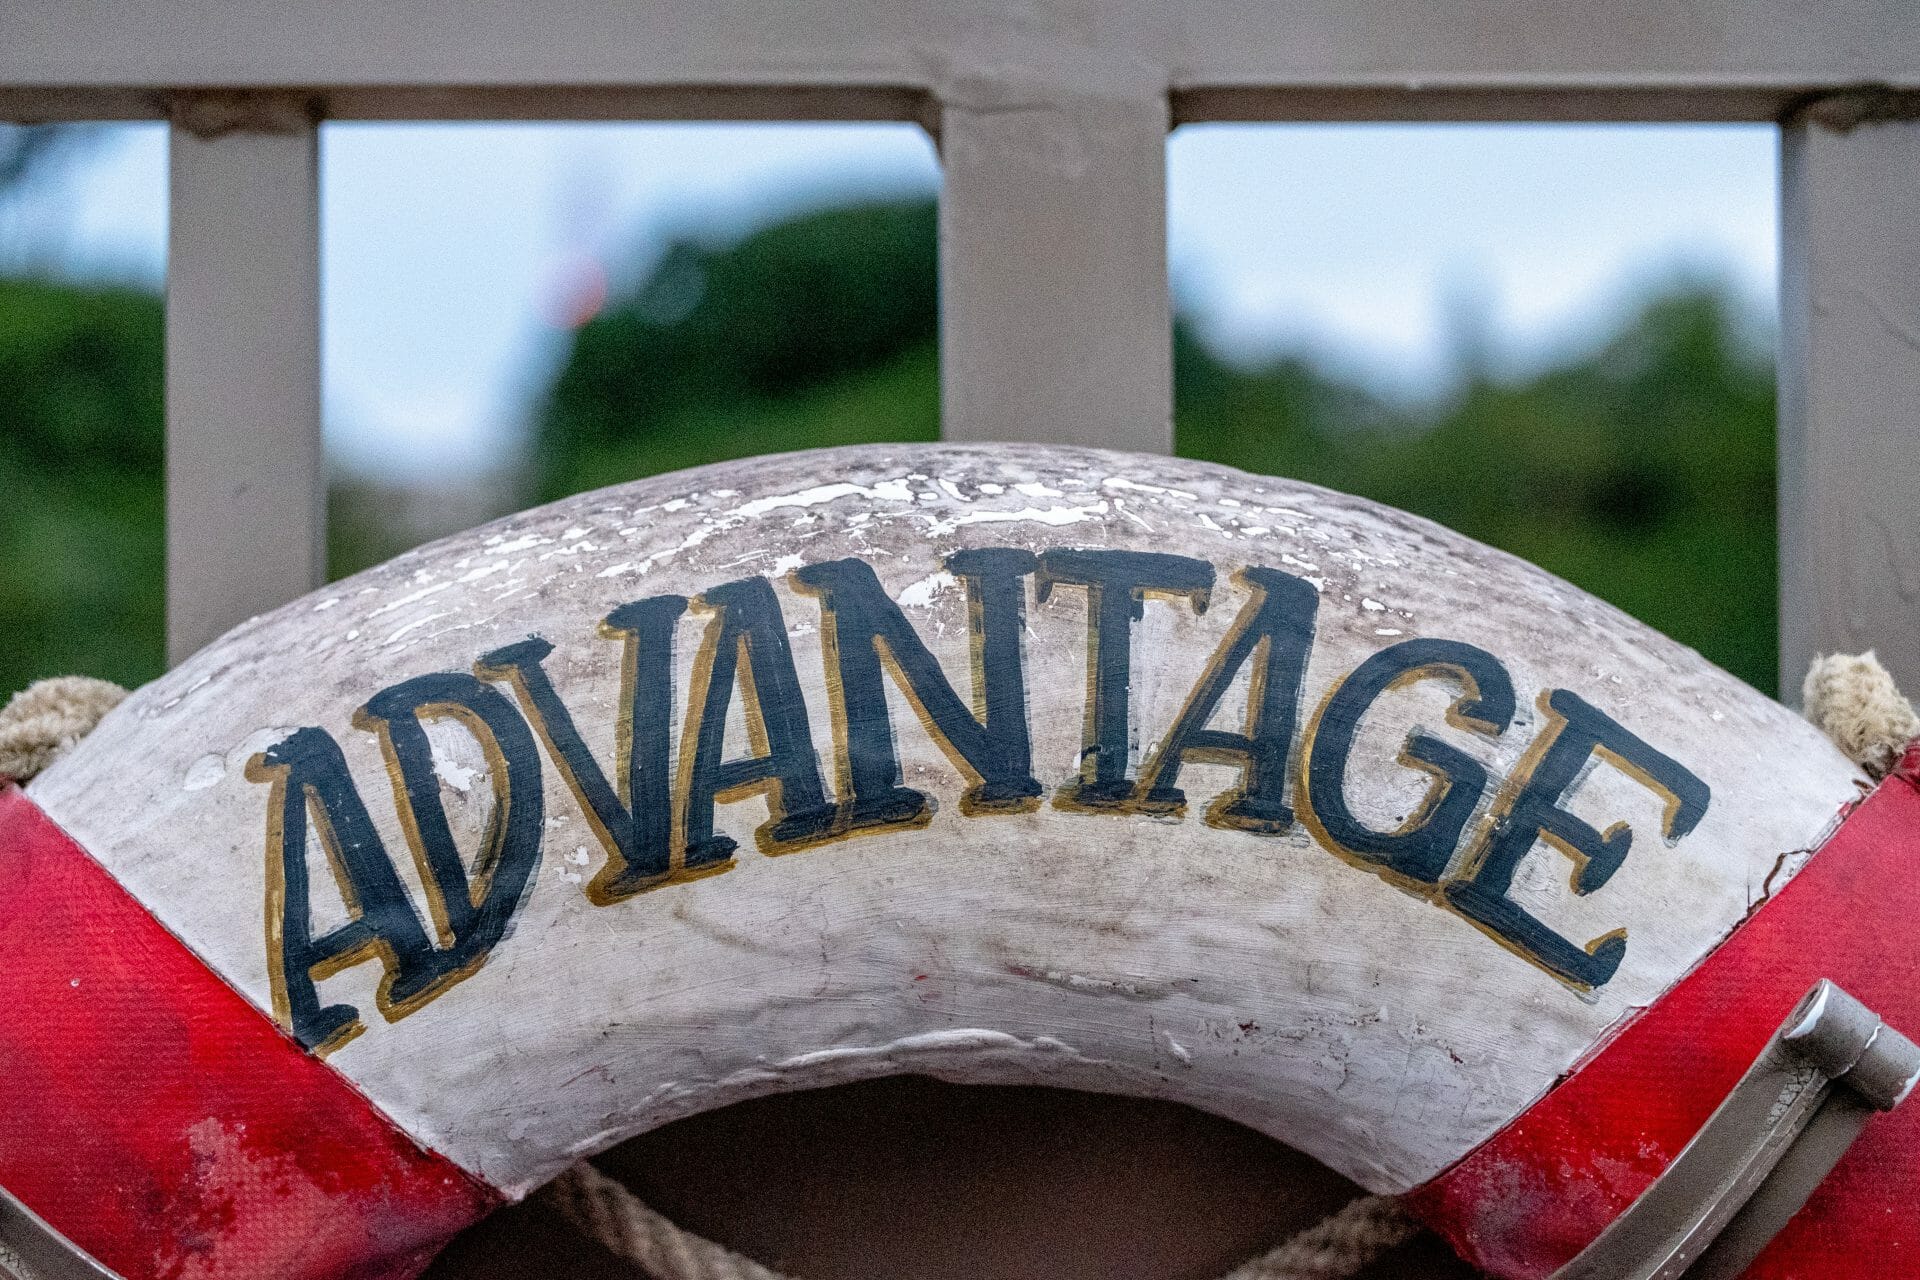 How to harness your unfair advantage